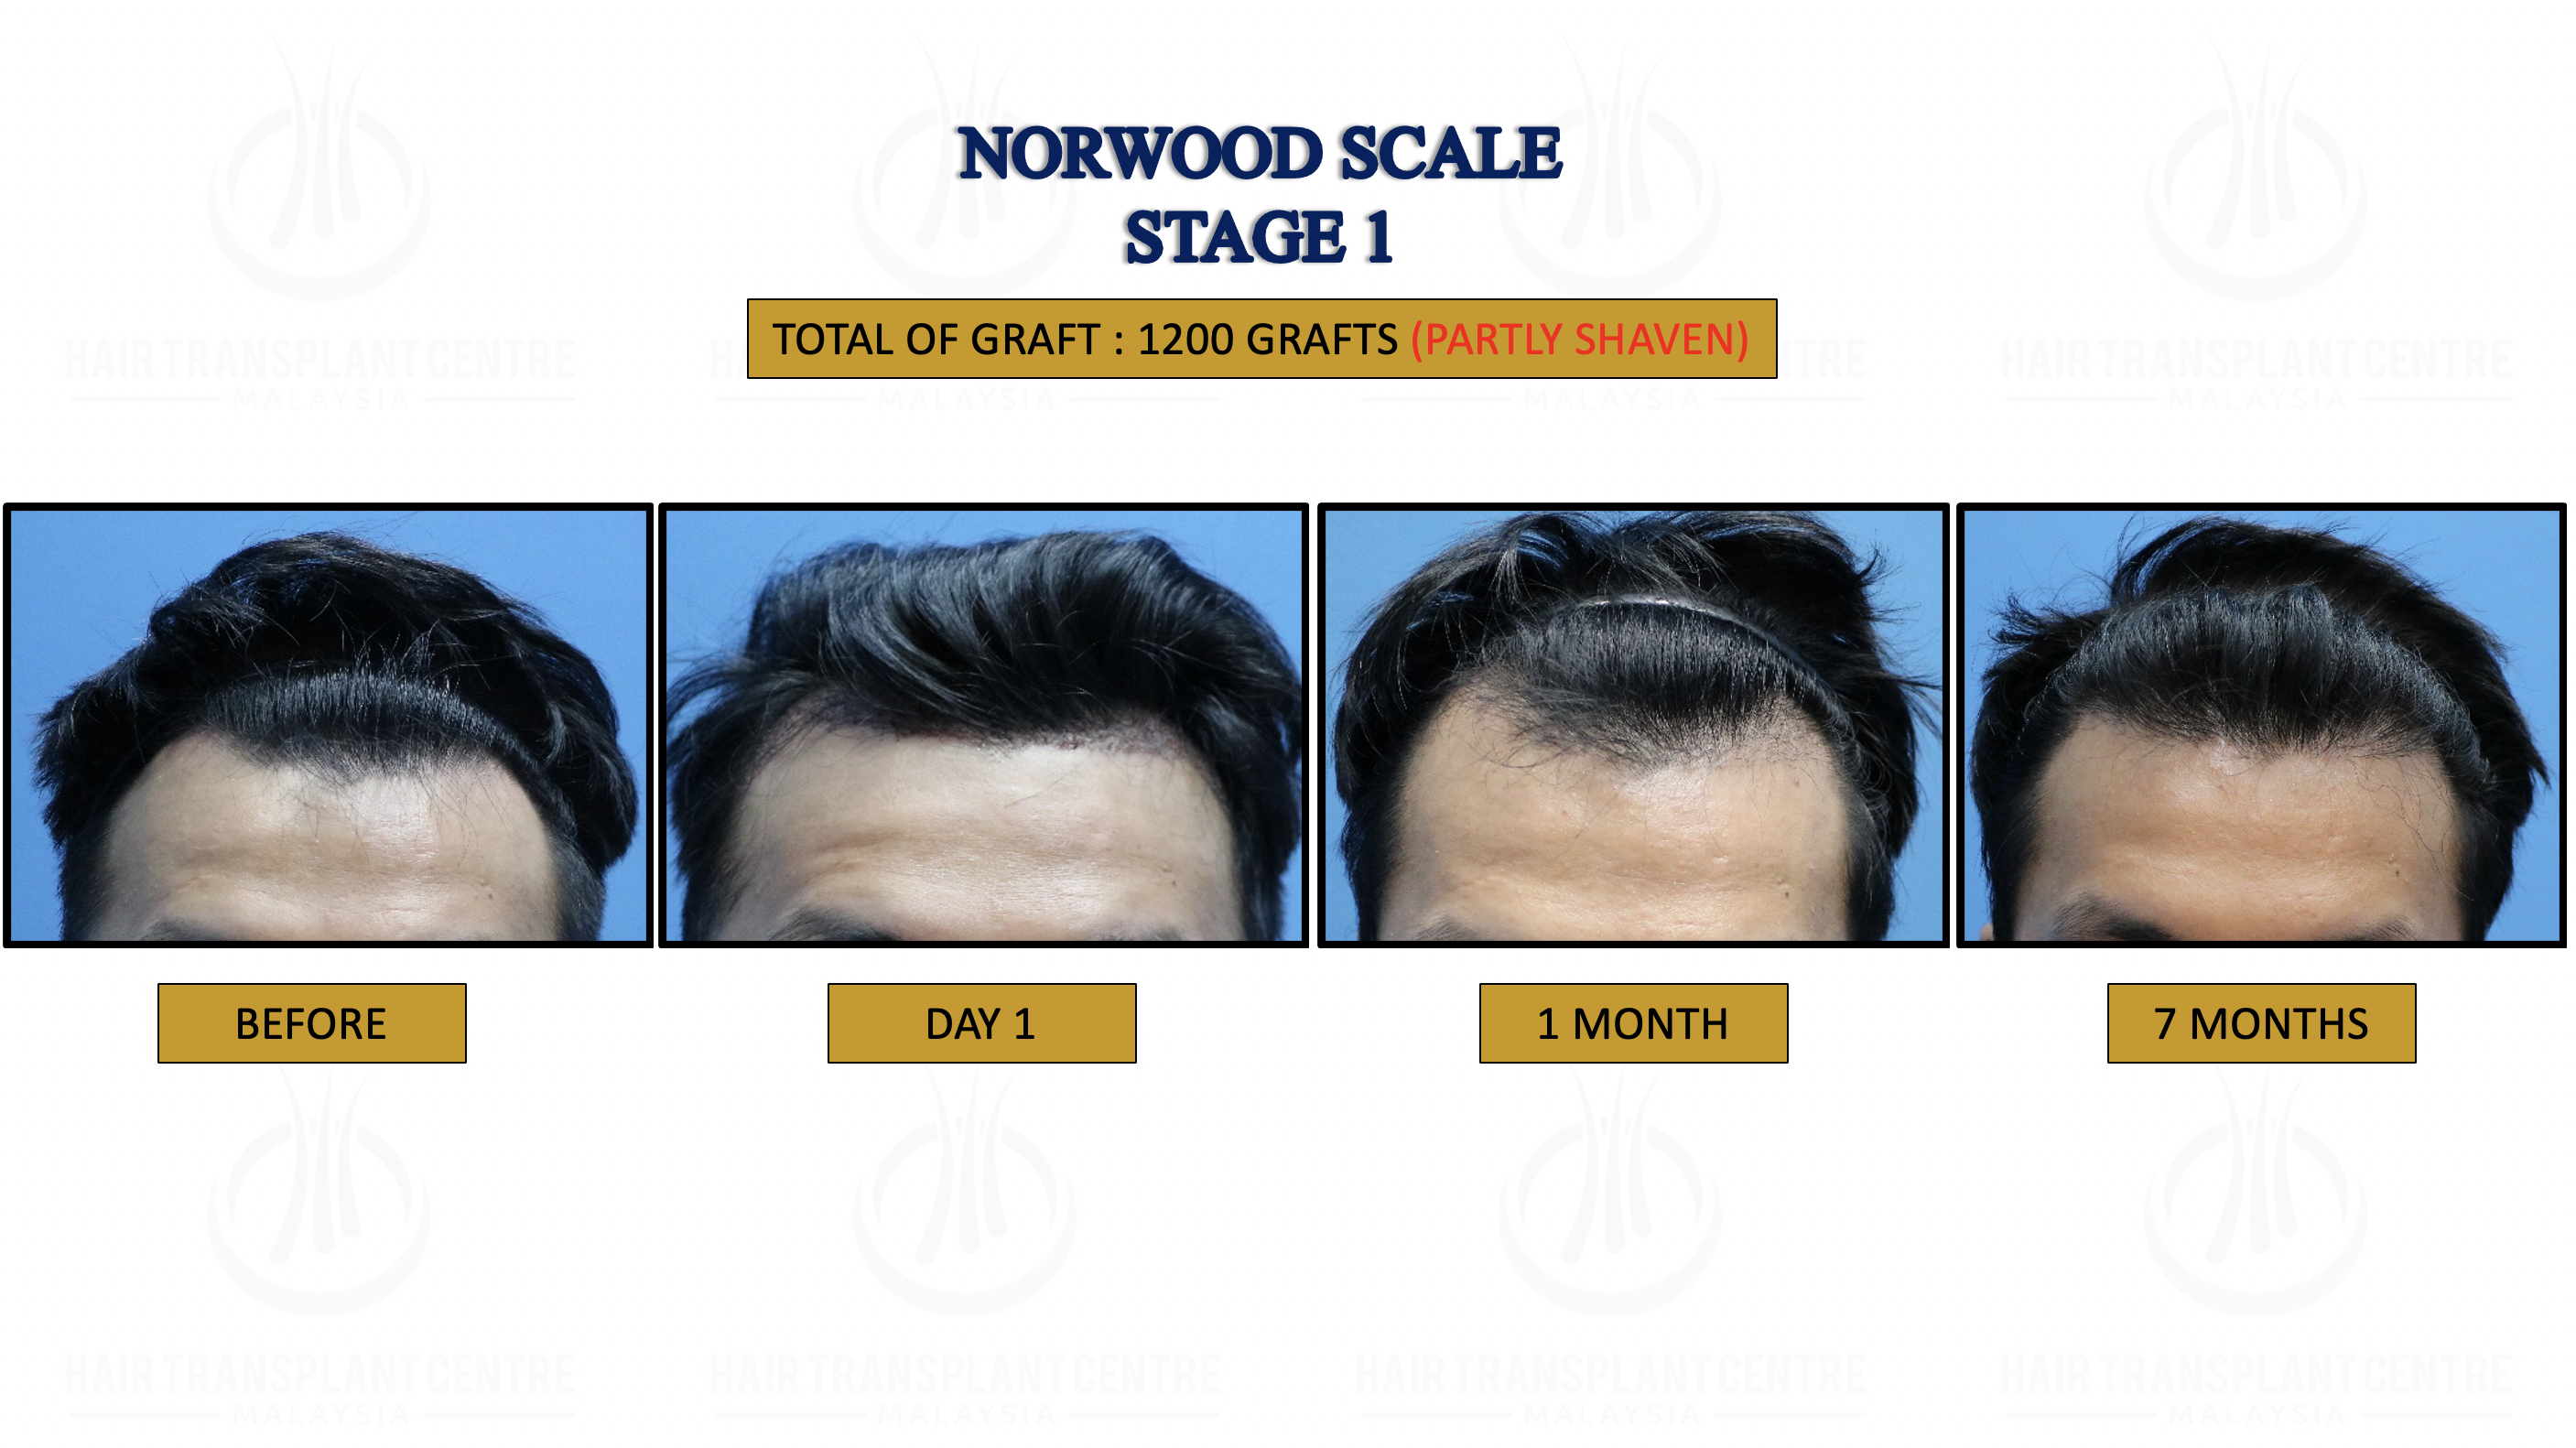 FUE Hair Transplant - Hair Regrowh Treatment - Safe and Proven Result